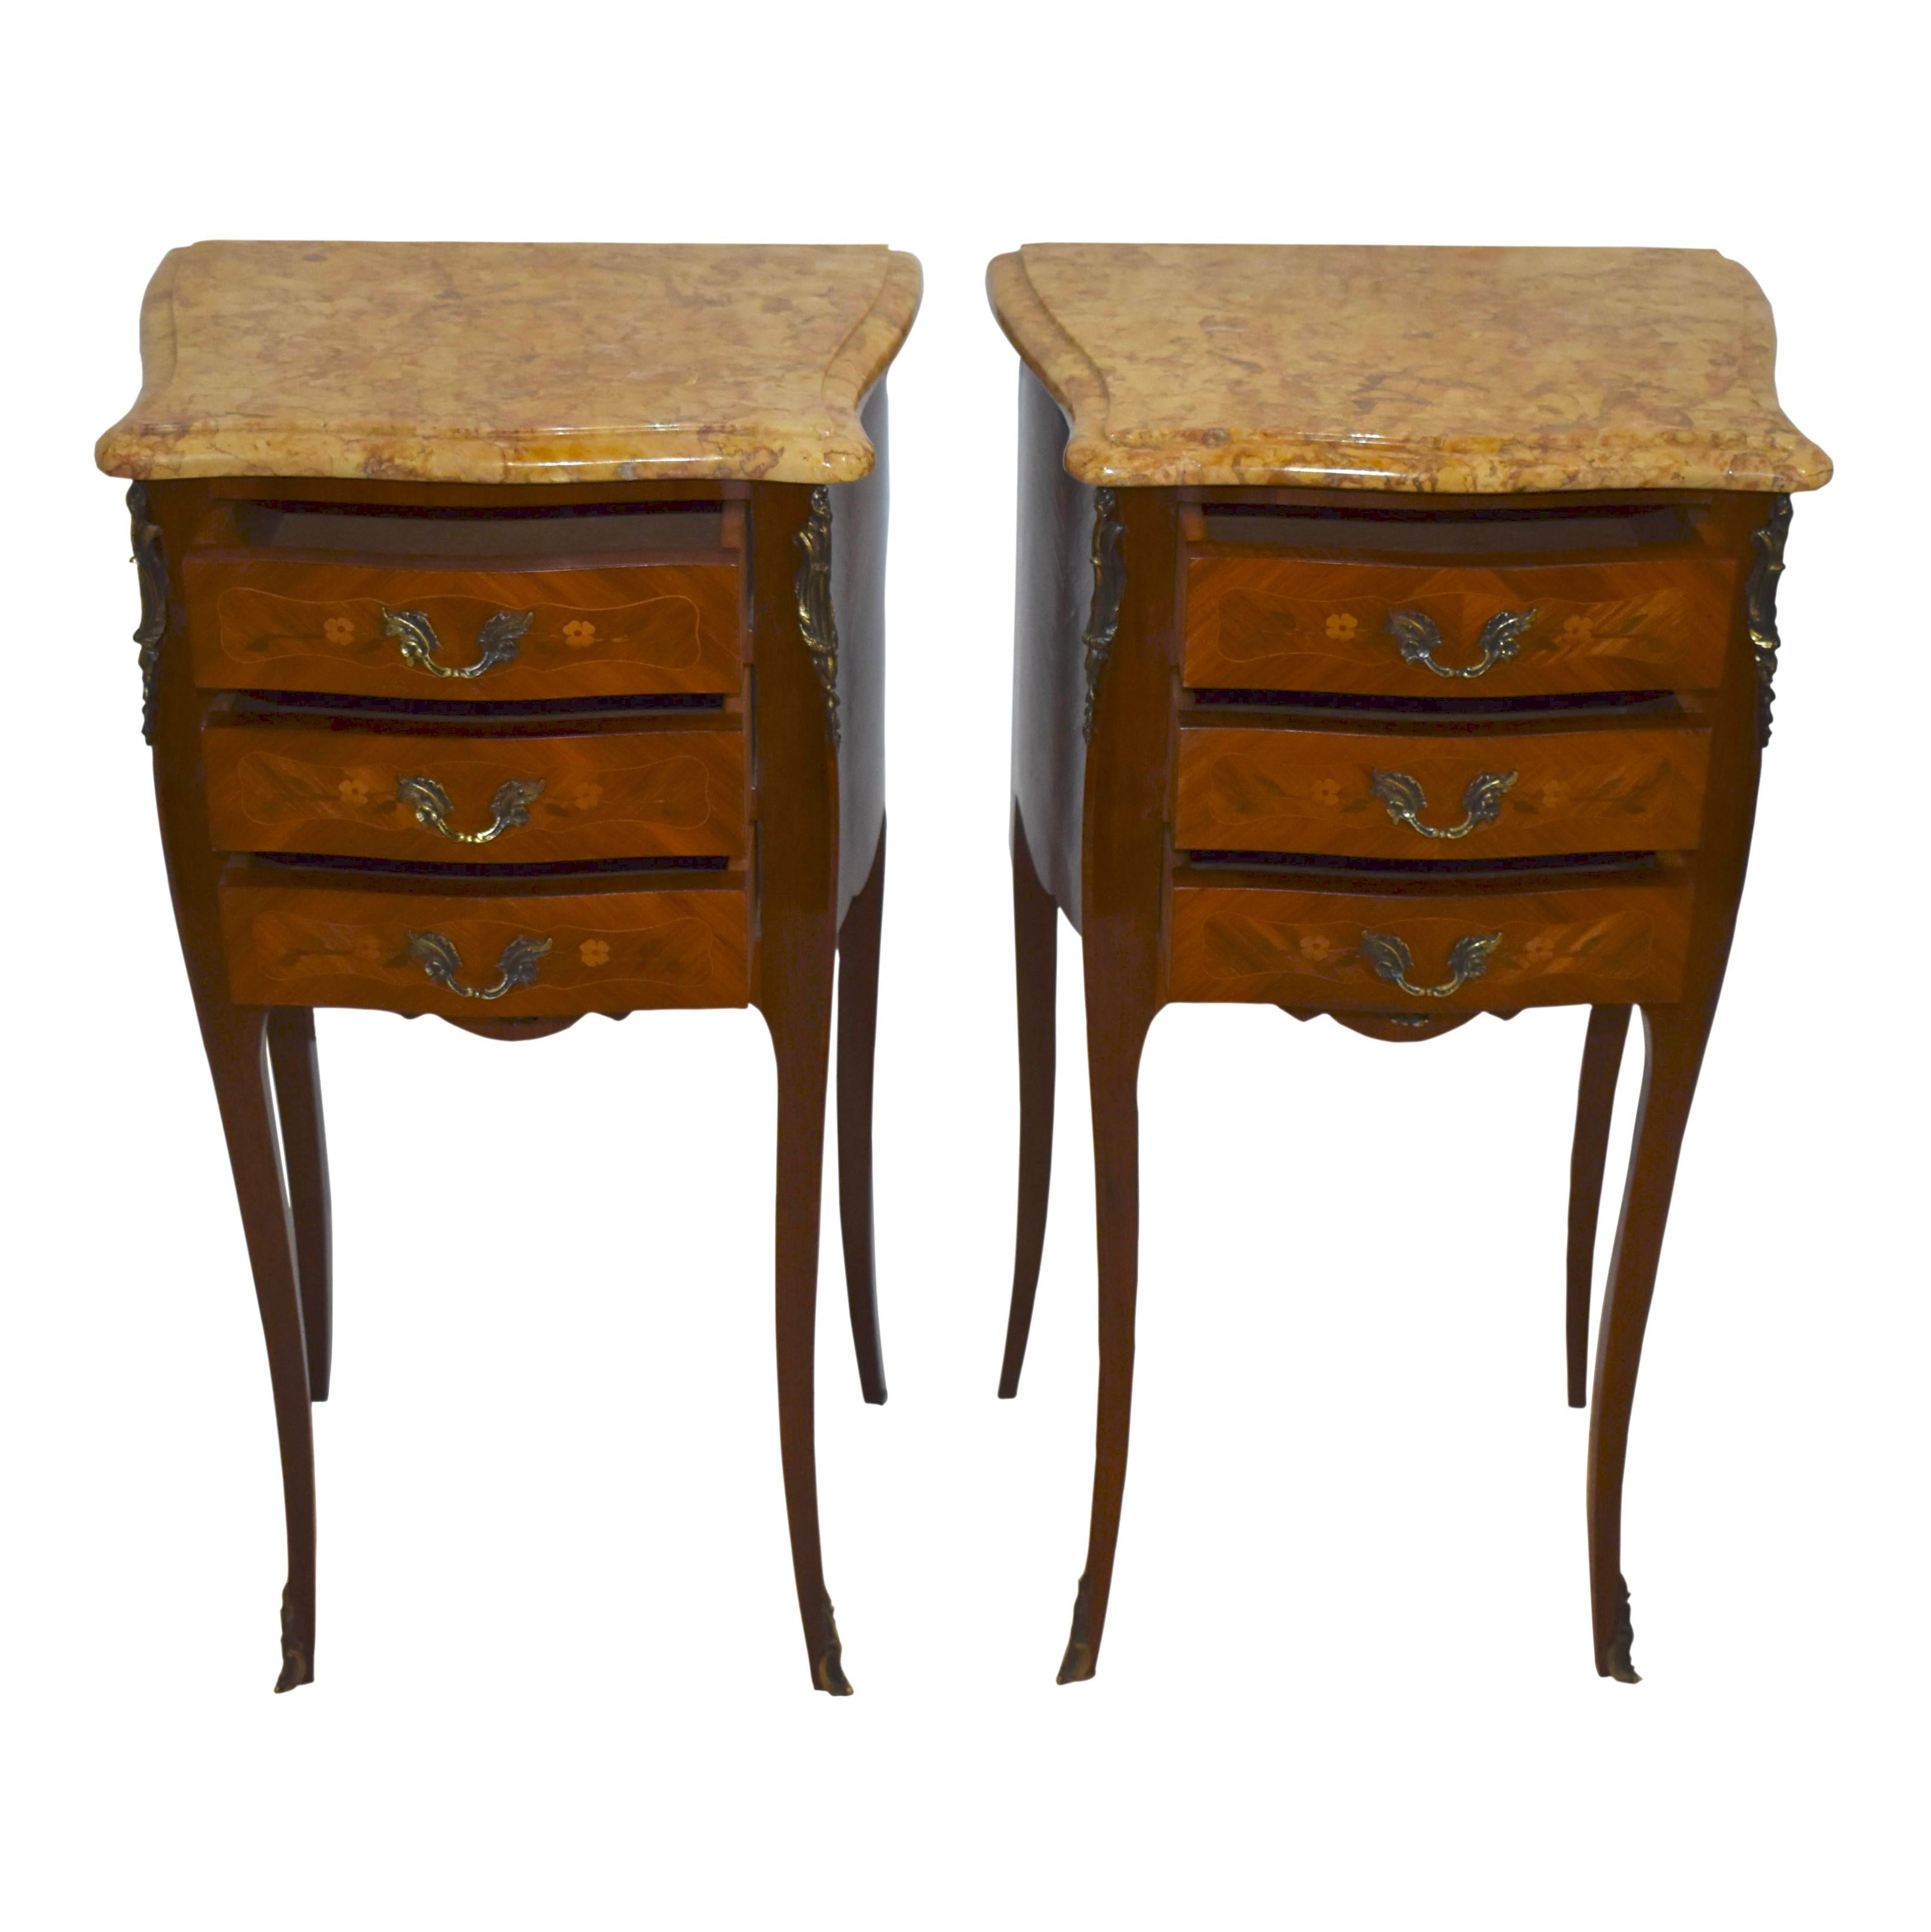 Petite and graceful, this set of two Louis XV nightstands crafted in the late-19th century pairs stunning marble tops over mahogany, bombe shaped bases raised on slender saber style legs that taper and terminate in decorative sabots. The marble